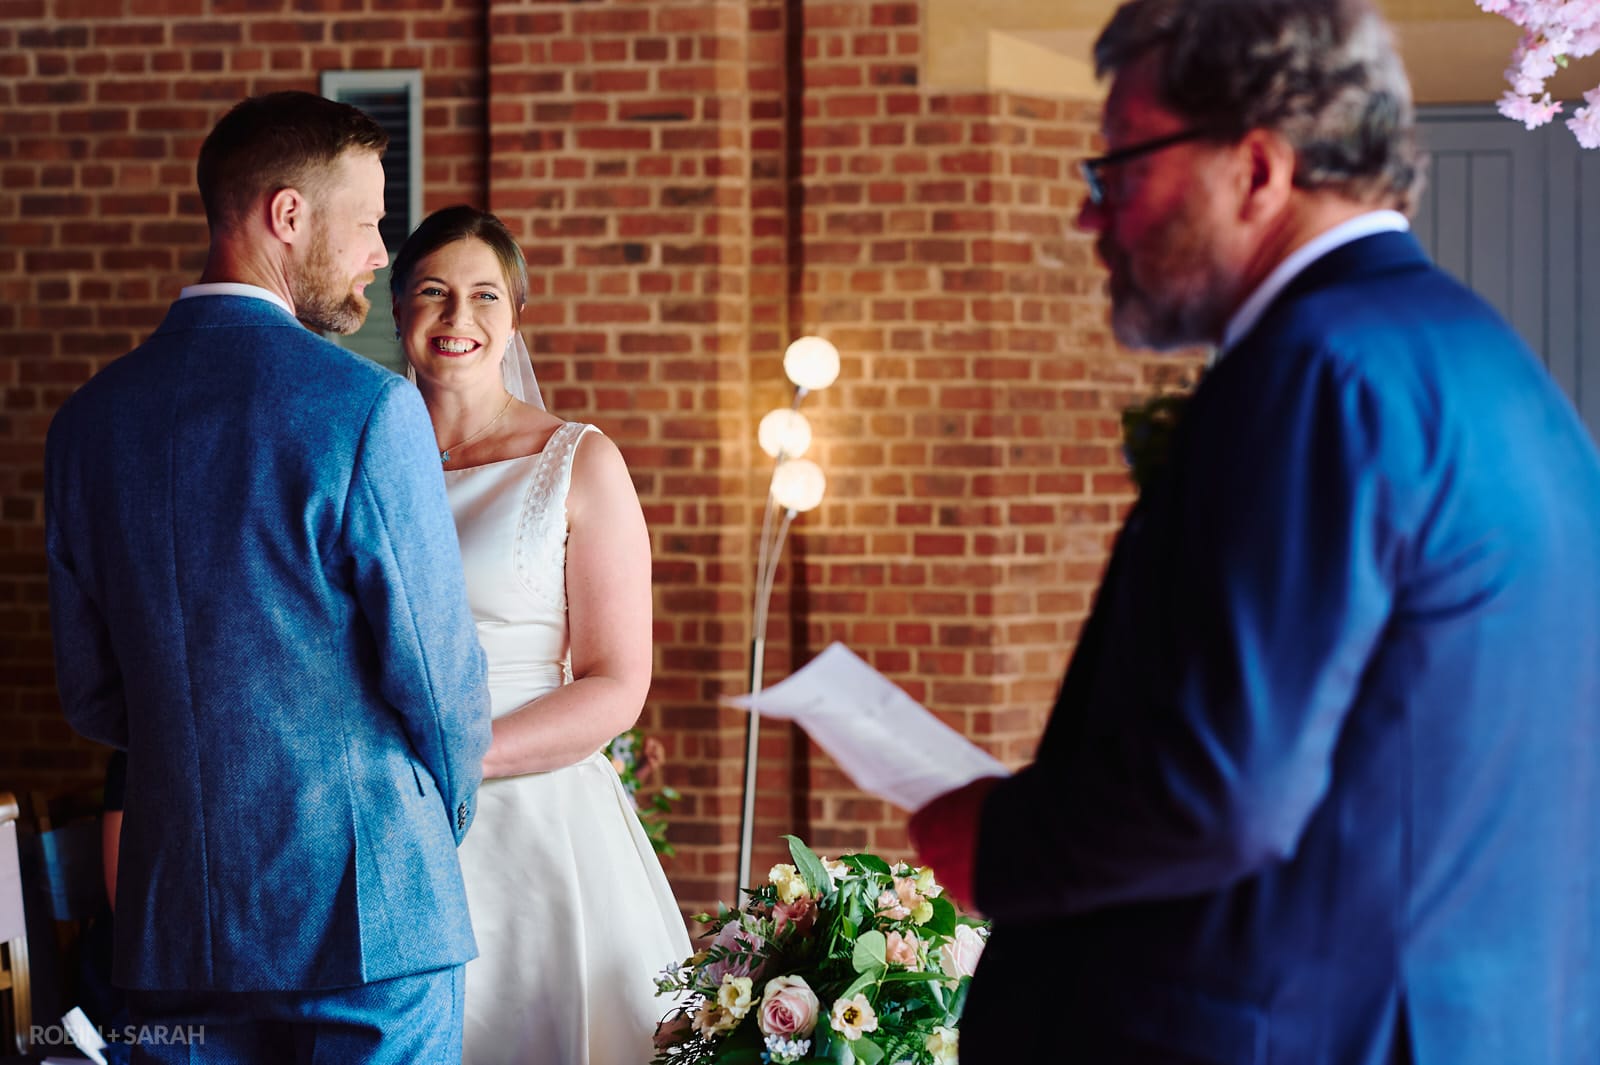 Bride listens to guest delivering reading during wedding ceremony.